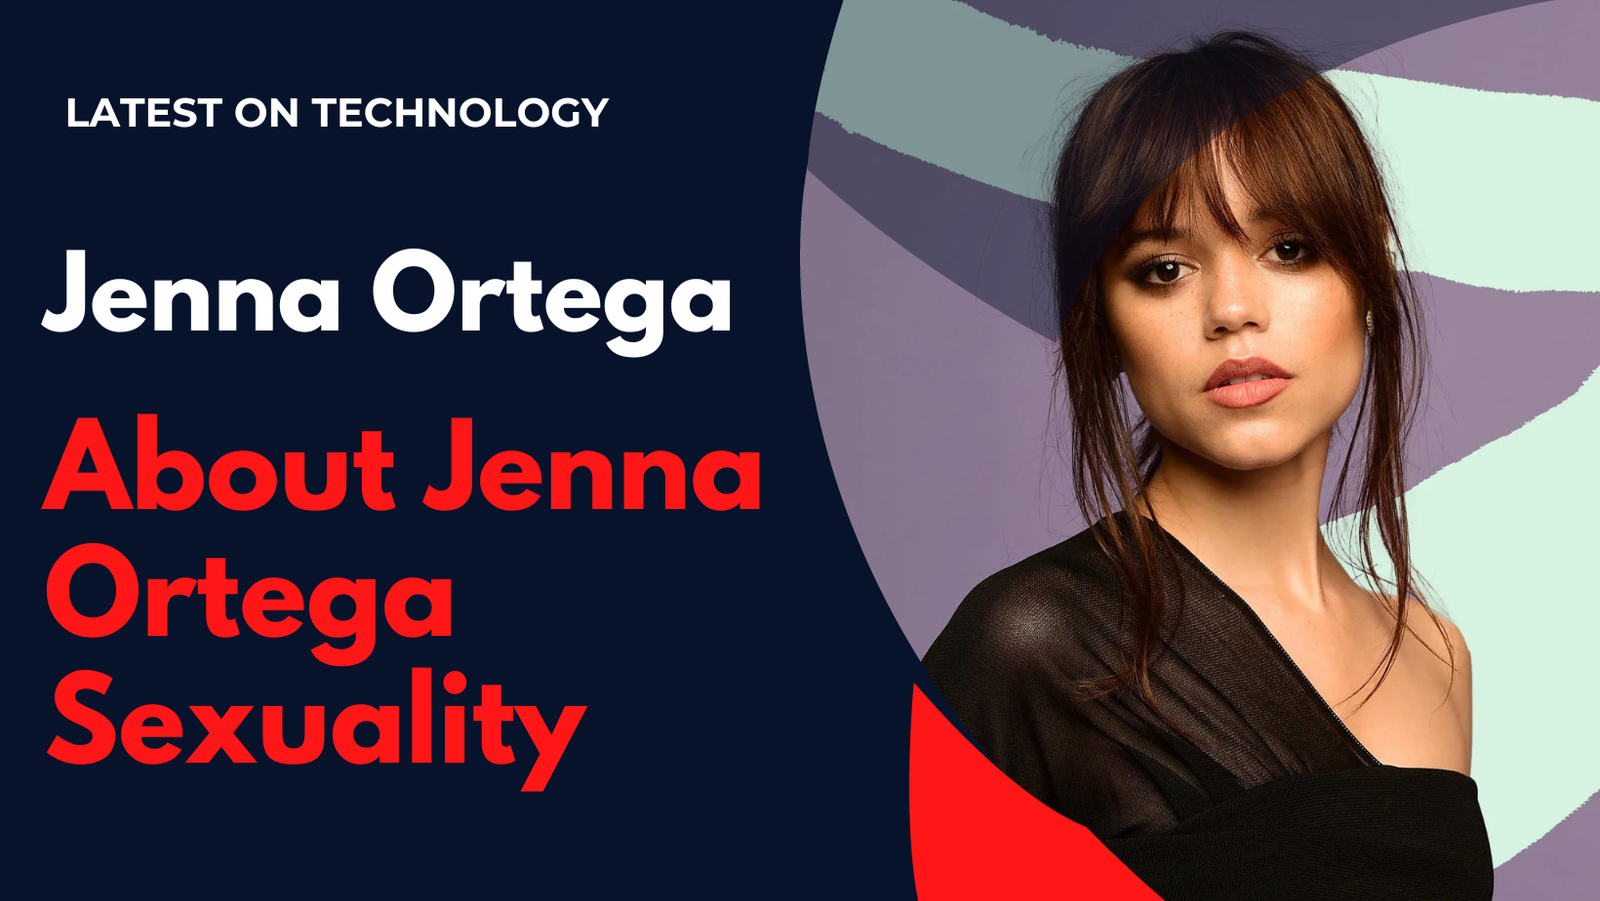 Jenna Ortega: Is She Gay? Examining Her Connections!